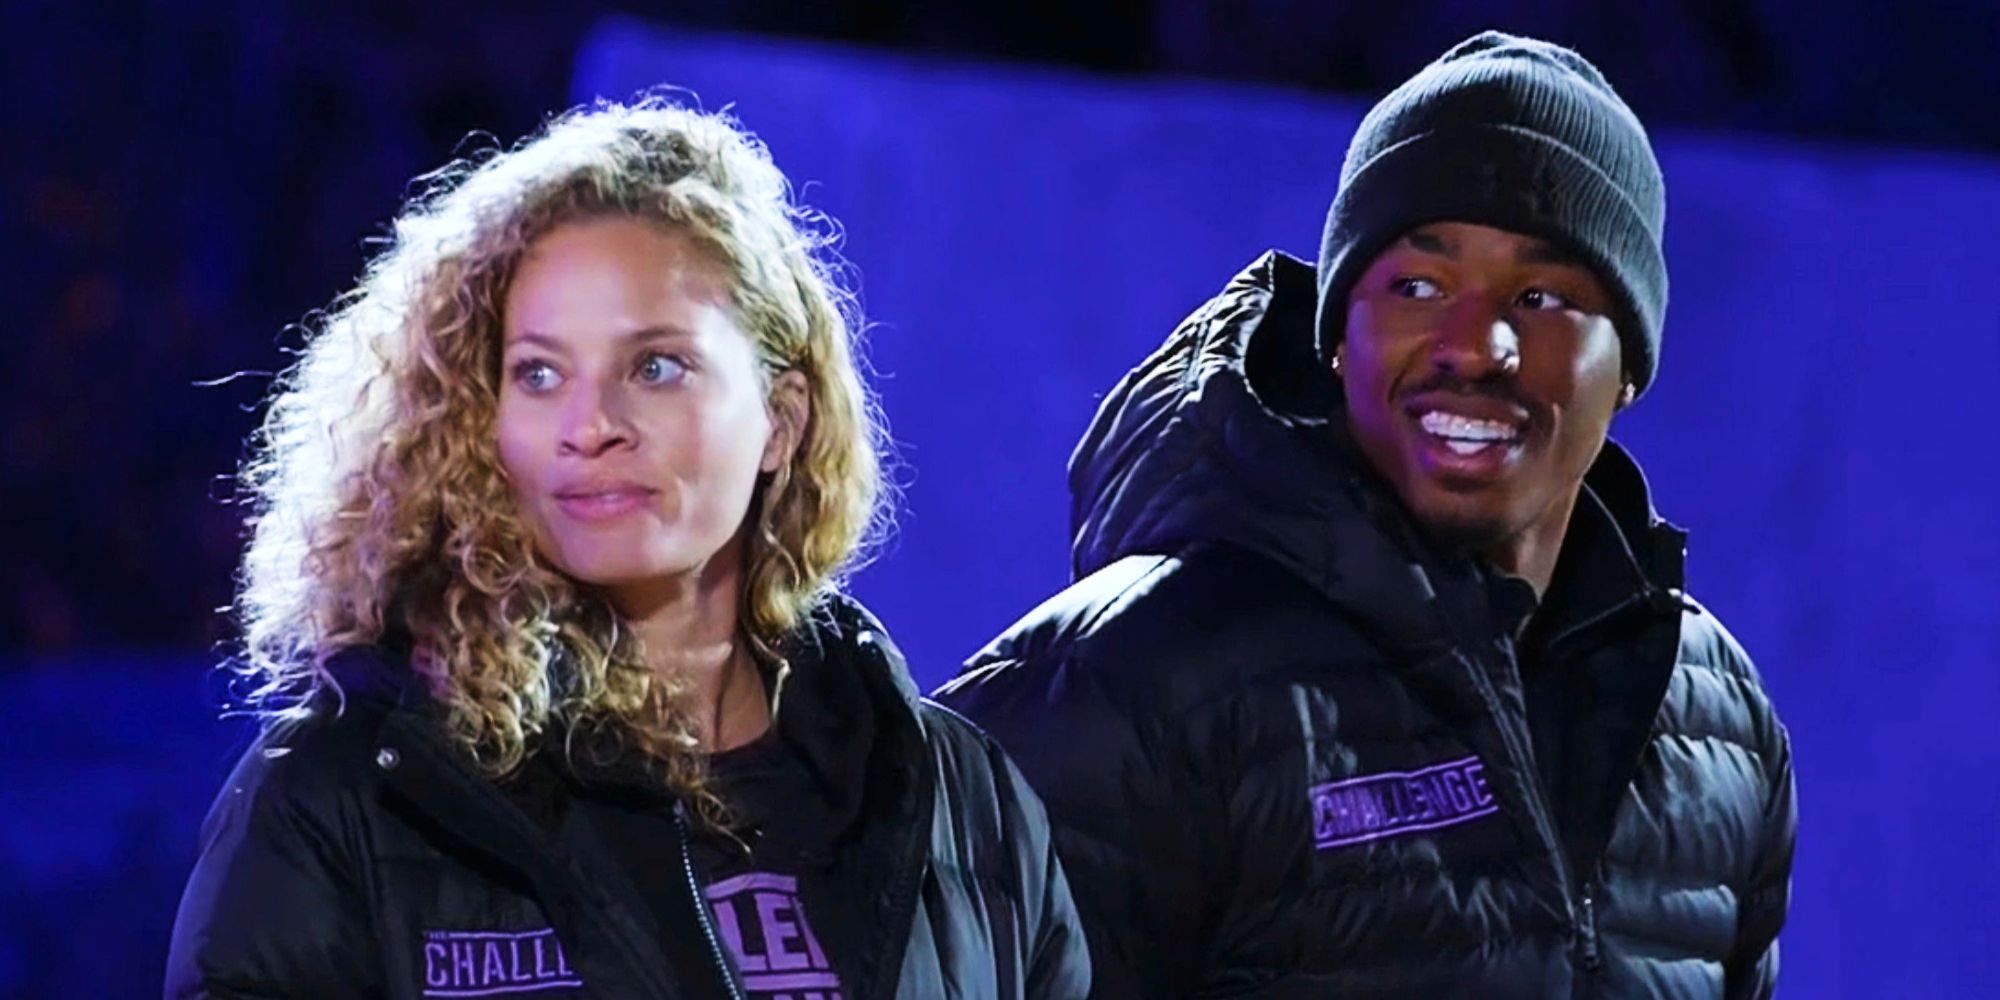 Amber Borzotra and Chauncey Palmer on The Challenge wearing puffy jackets and looking to the side